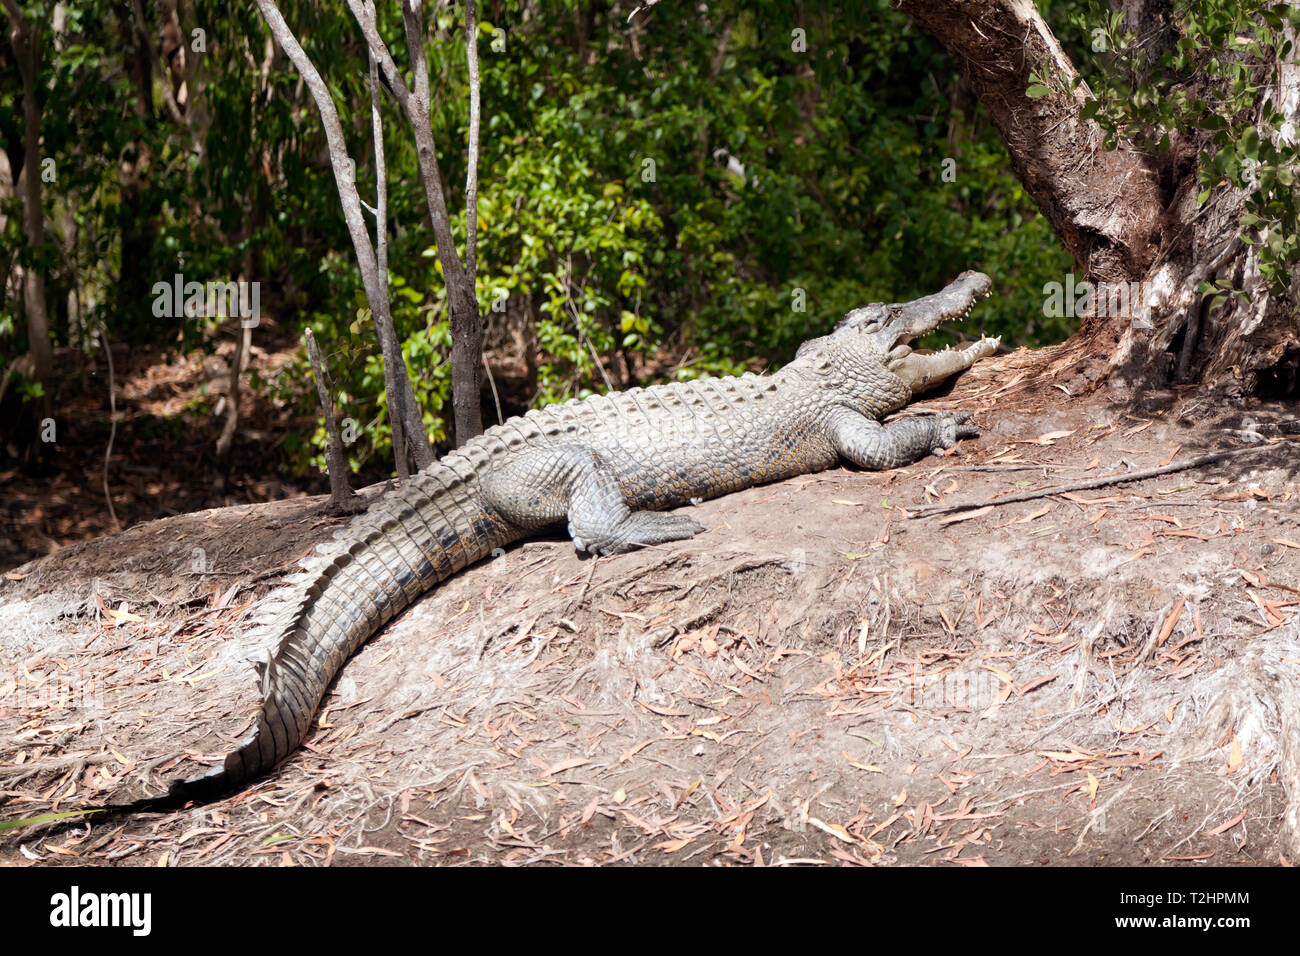 View of a  large Crocodile  at Hartley's Crocodile Adventures, Captain Cook Highway, Wangetti, Queensland, Australia. Stock Photo